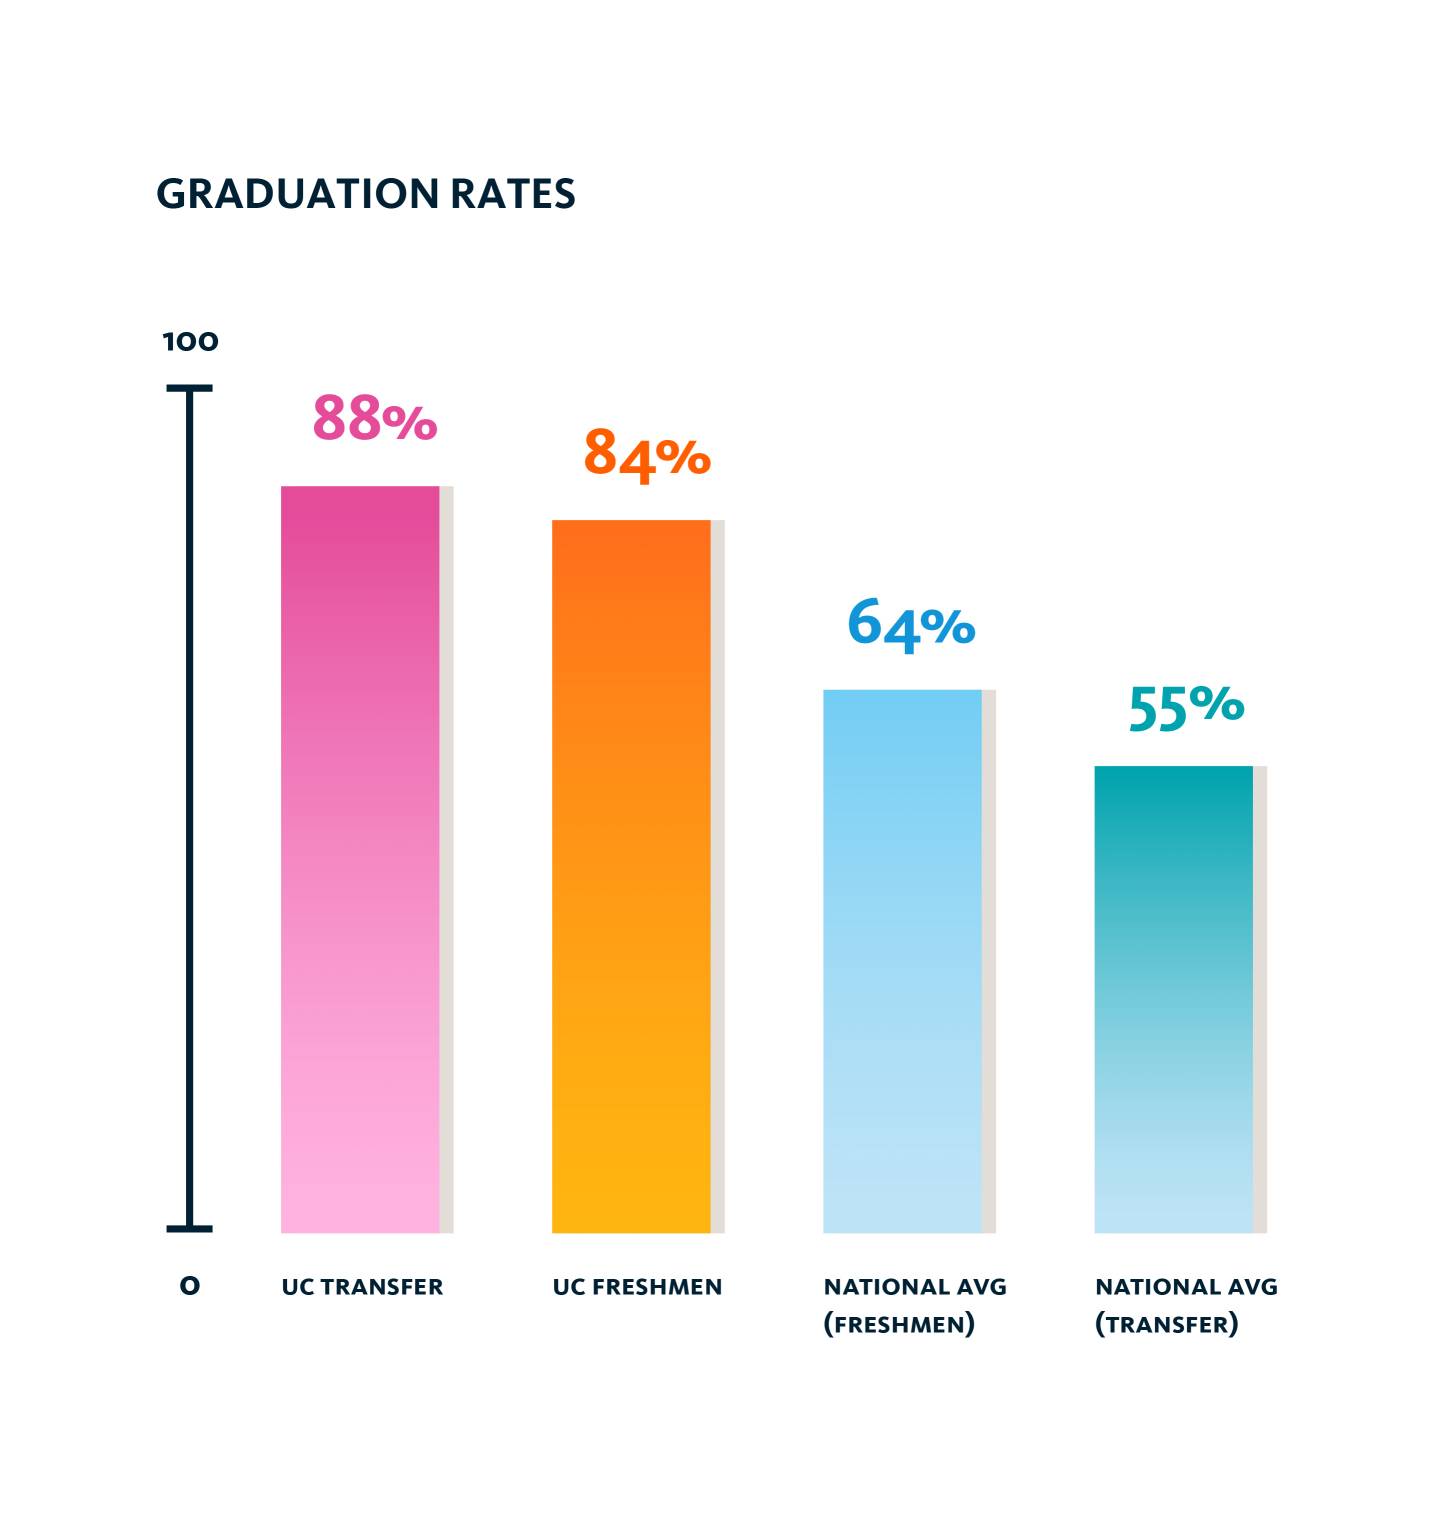 Bar chart showing national graduation rates for students